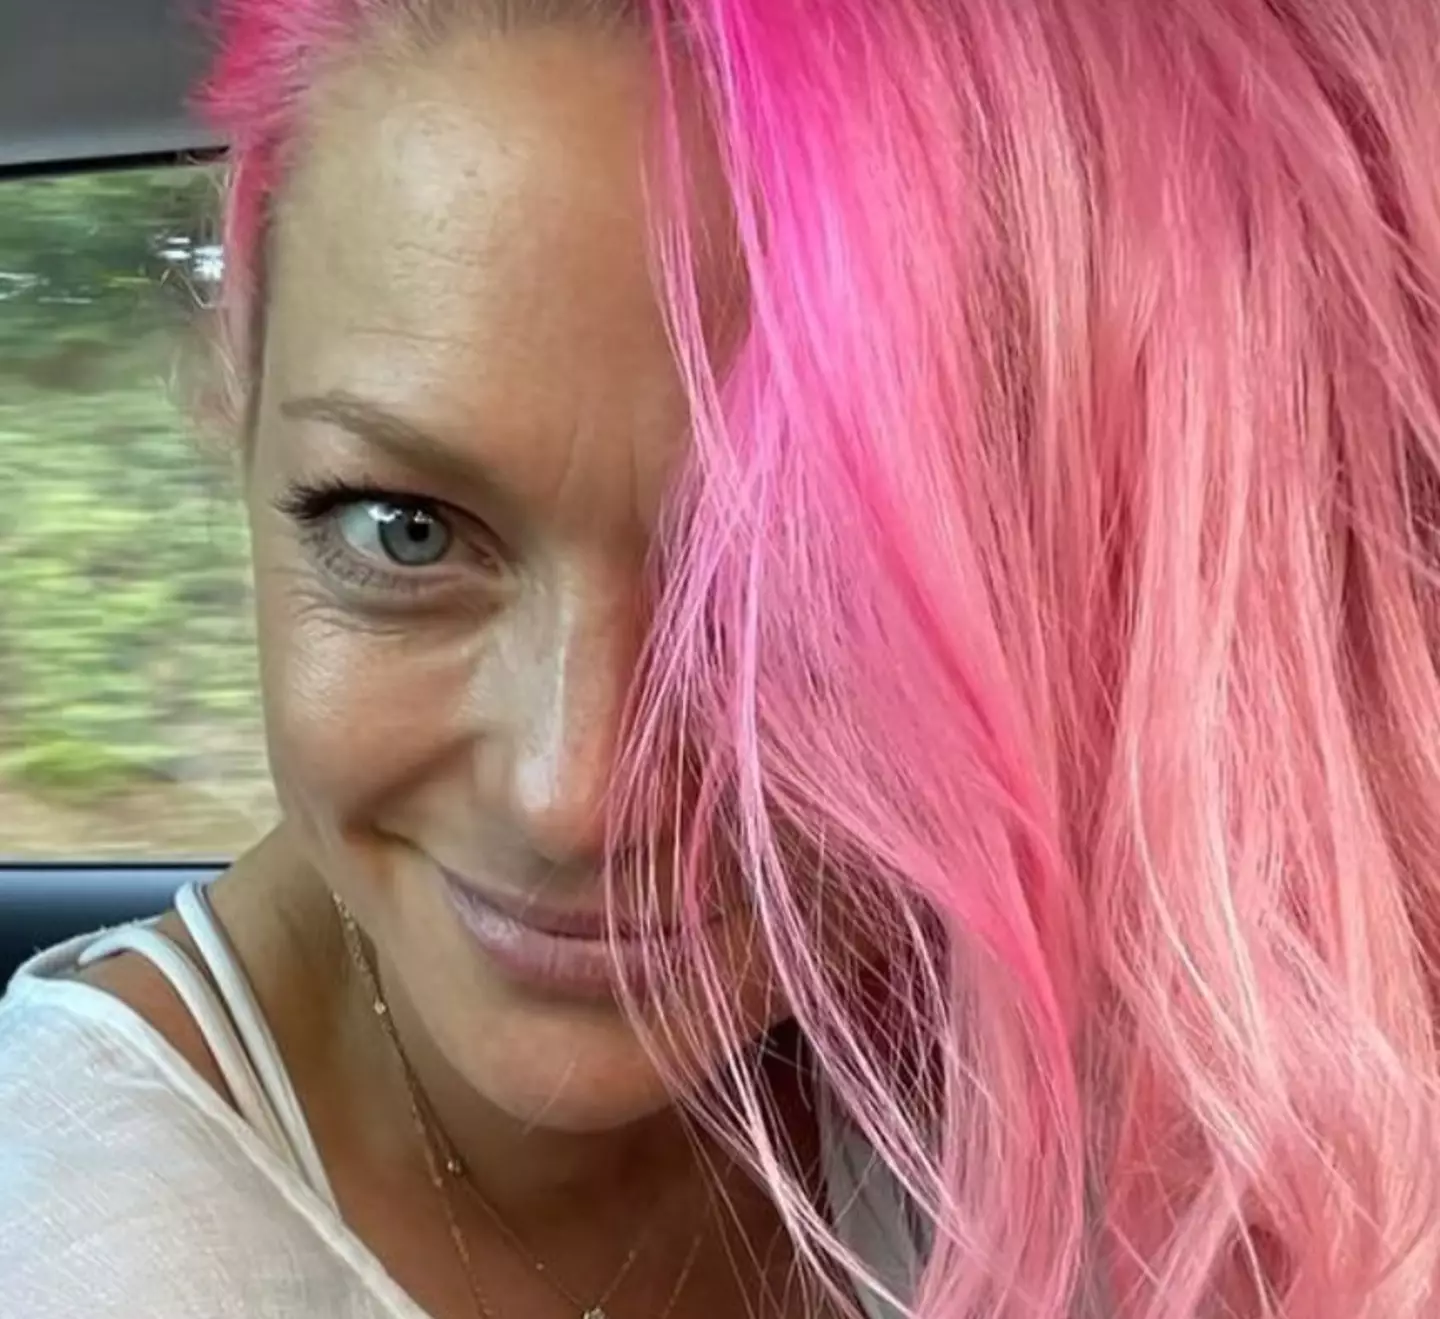 Hannah Spearritt was allegedly not told about being 'left out'.